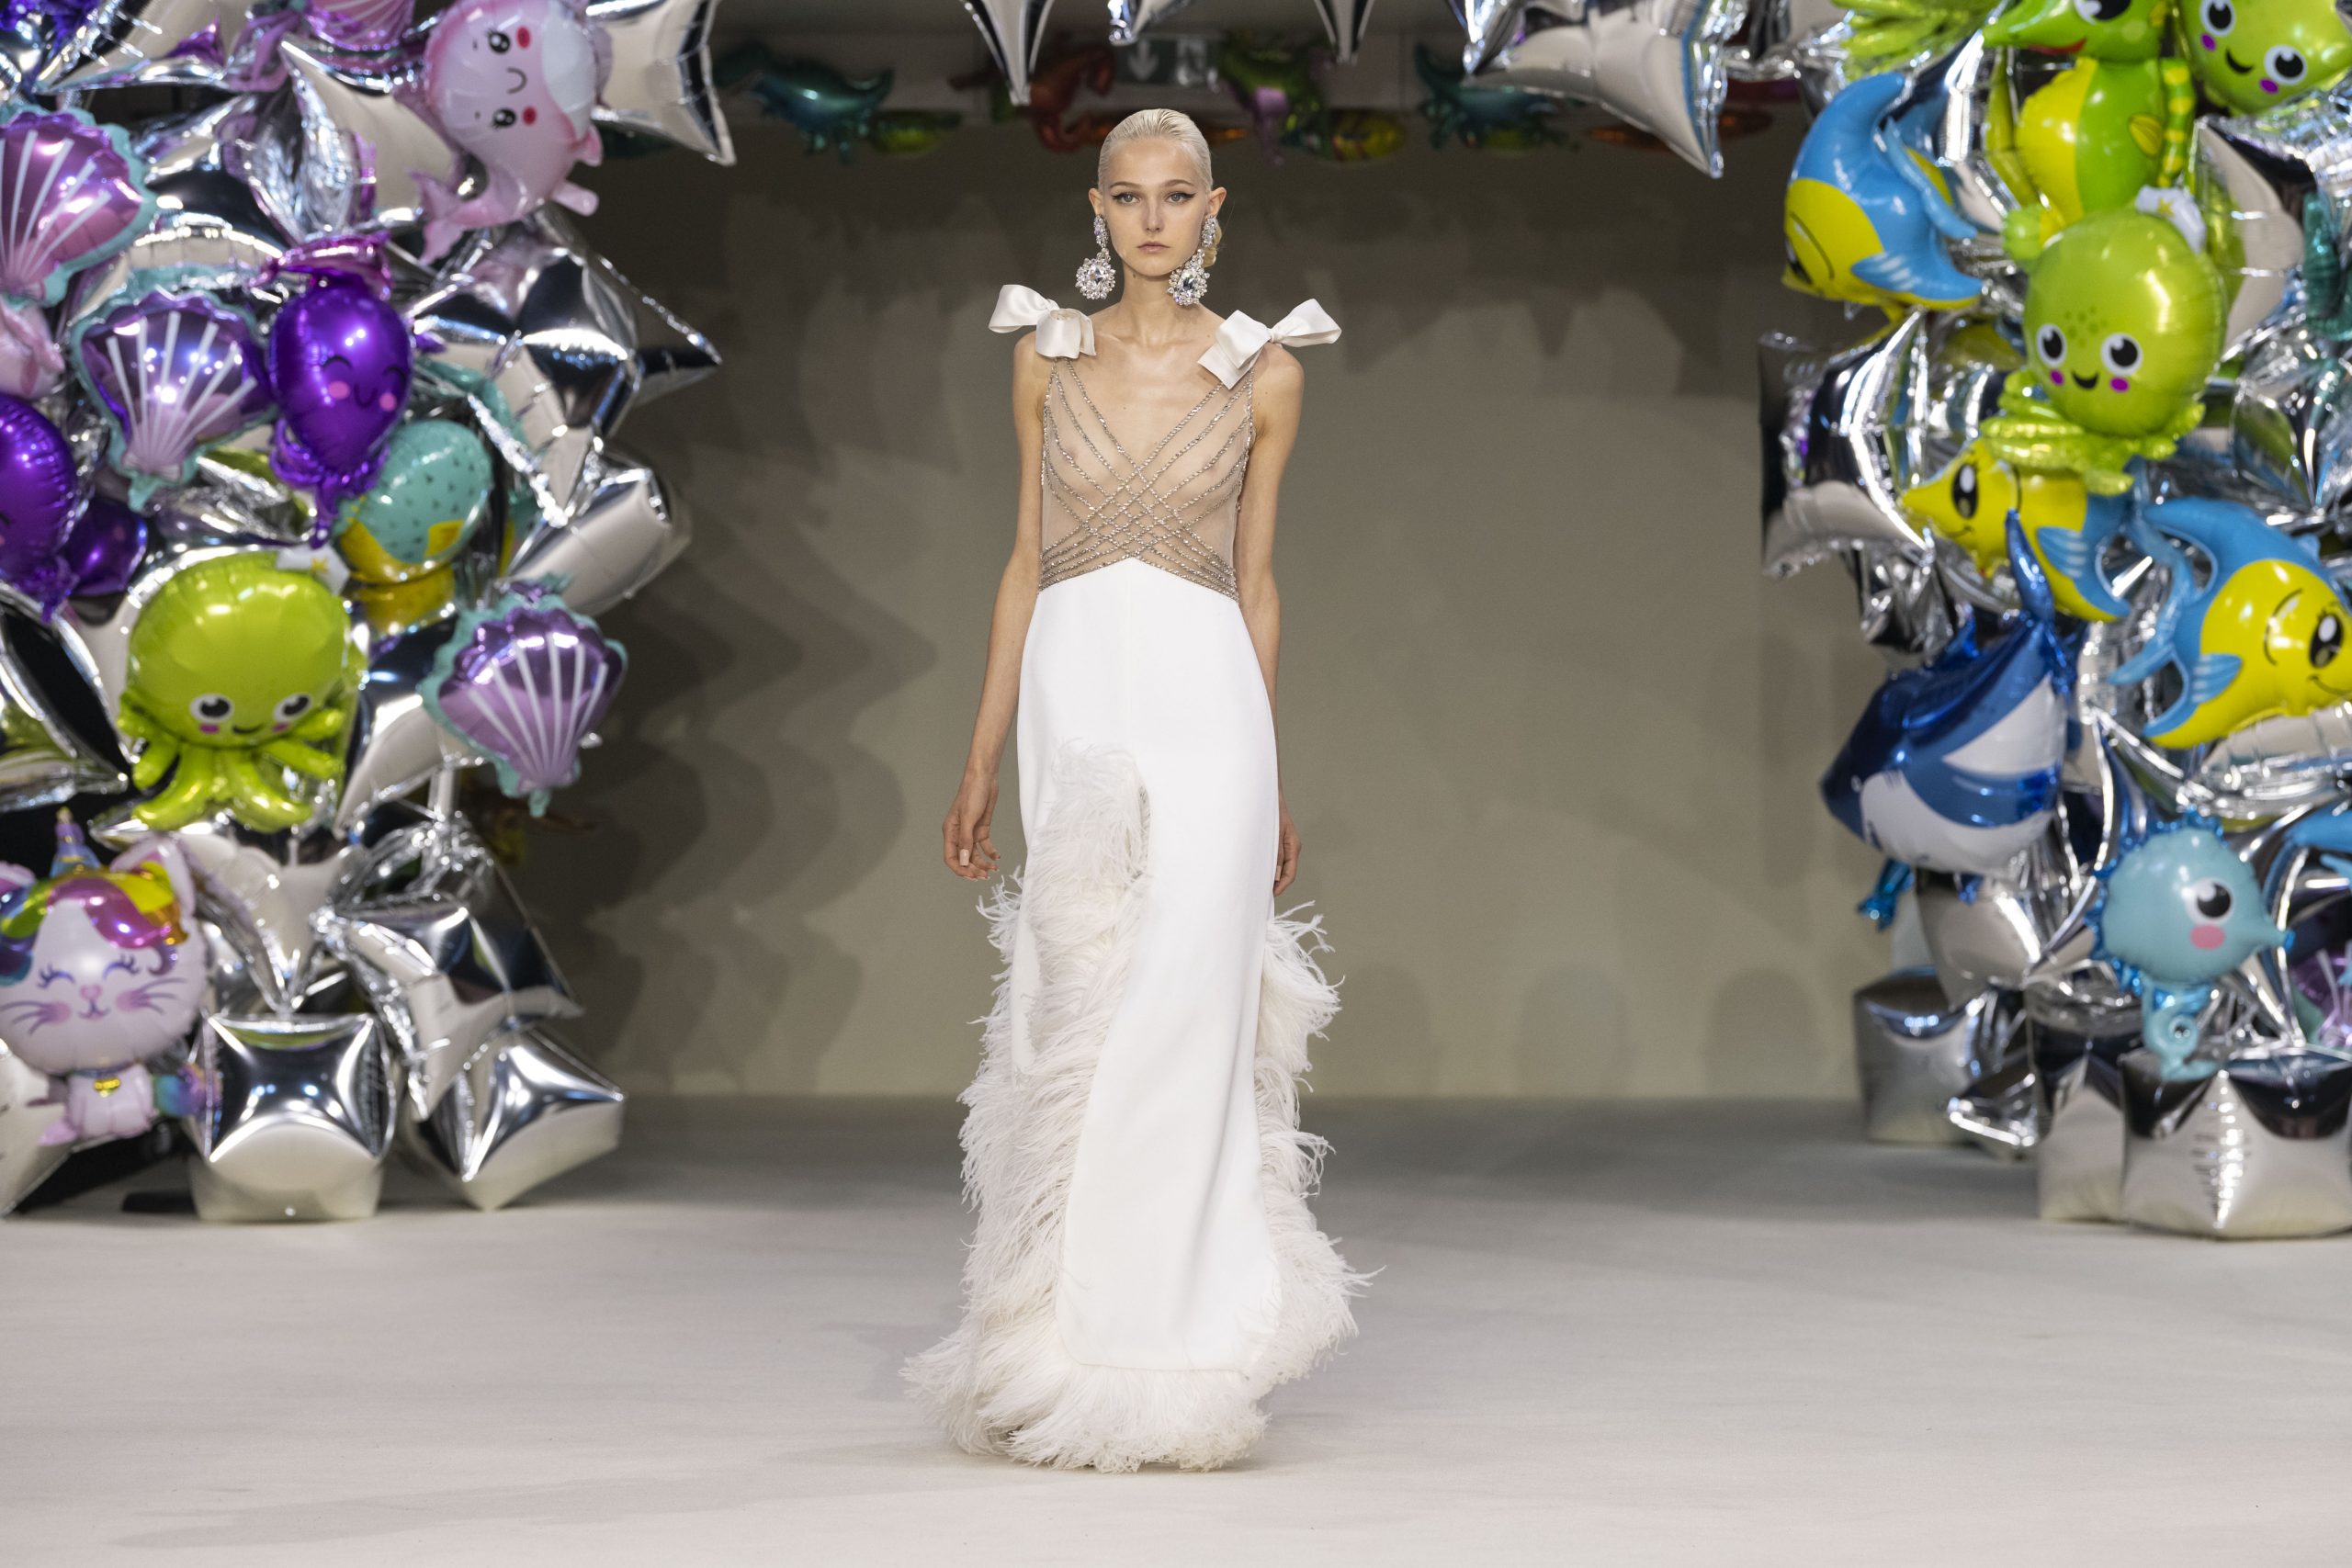 Giambattista Valli’s Haute Couture Gowns Are All About Extravagance, Celebration And Unadulterated Glamour.